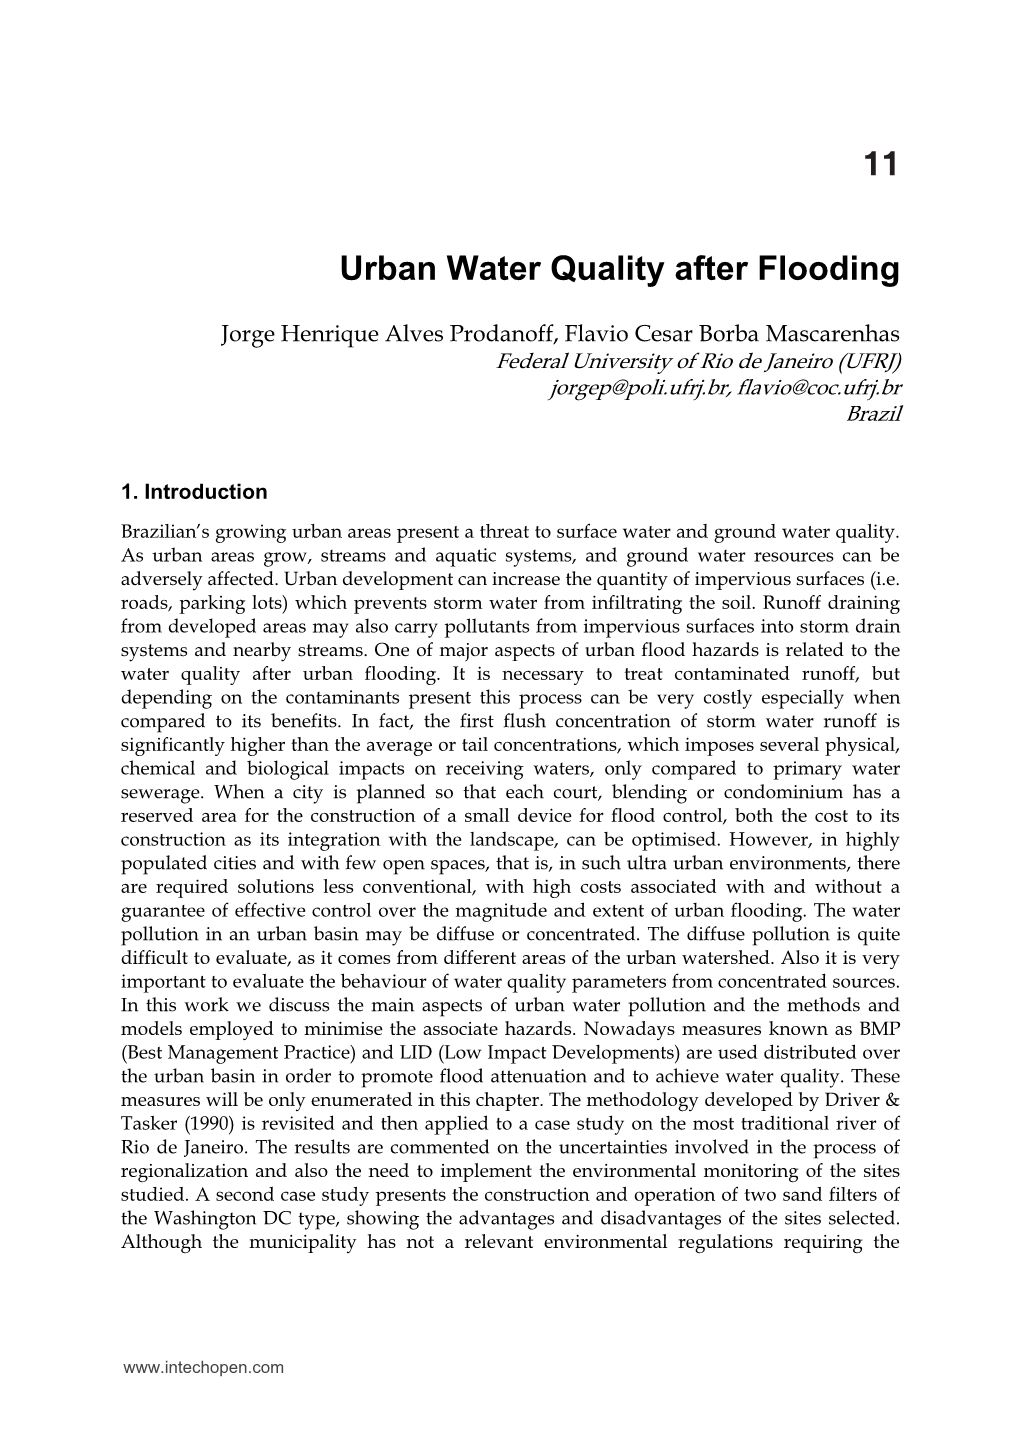 Urban Water Quality After Flooding 1111